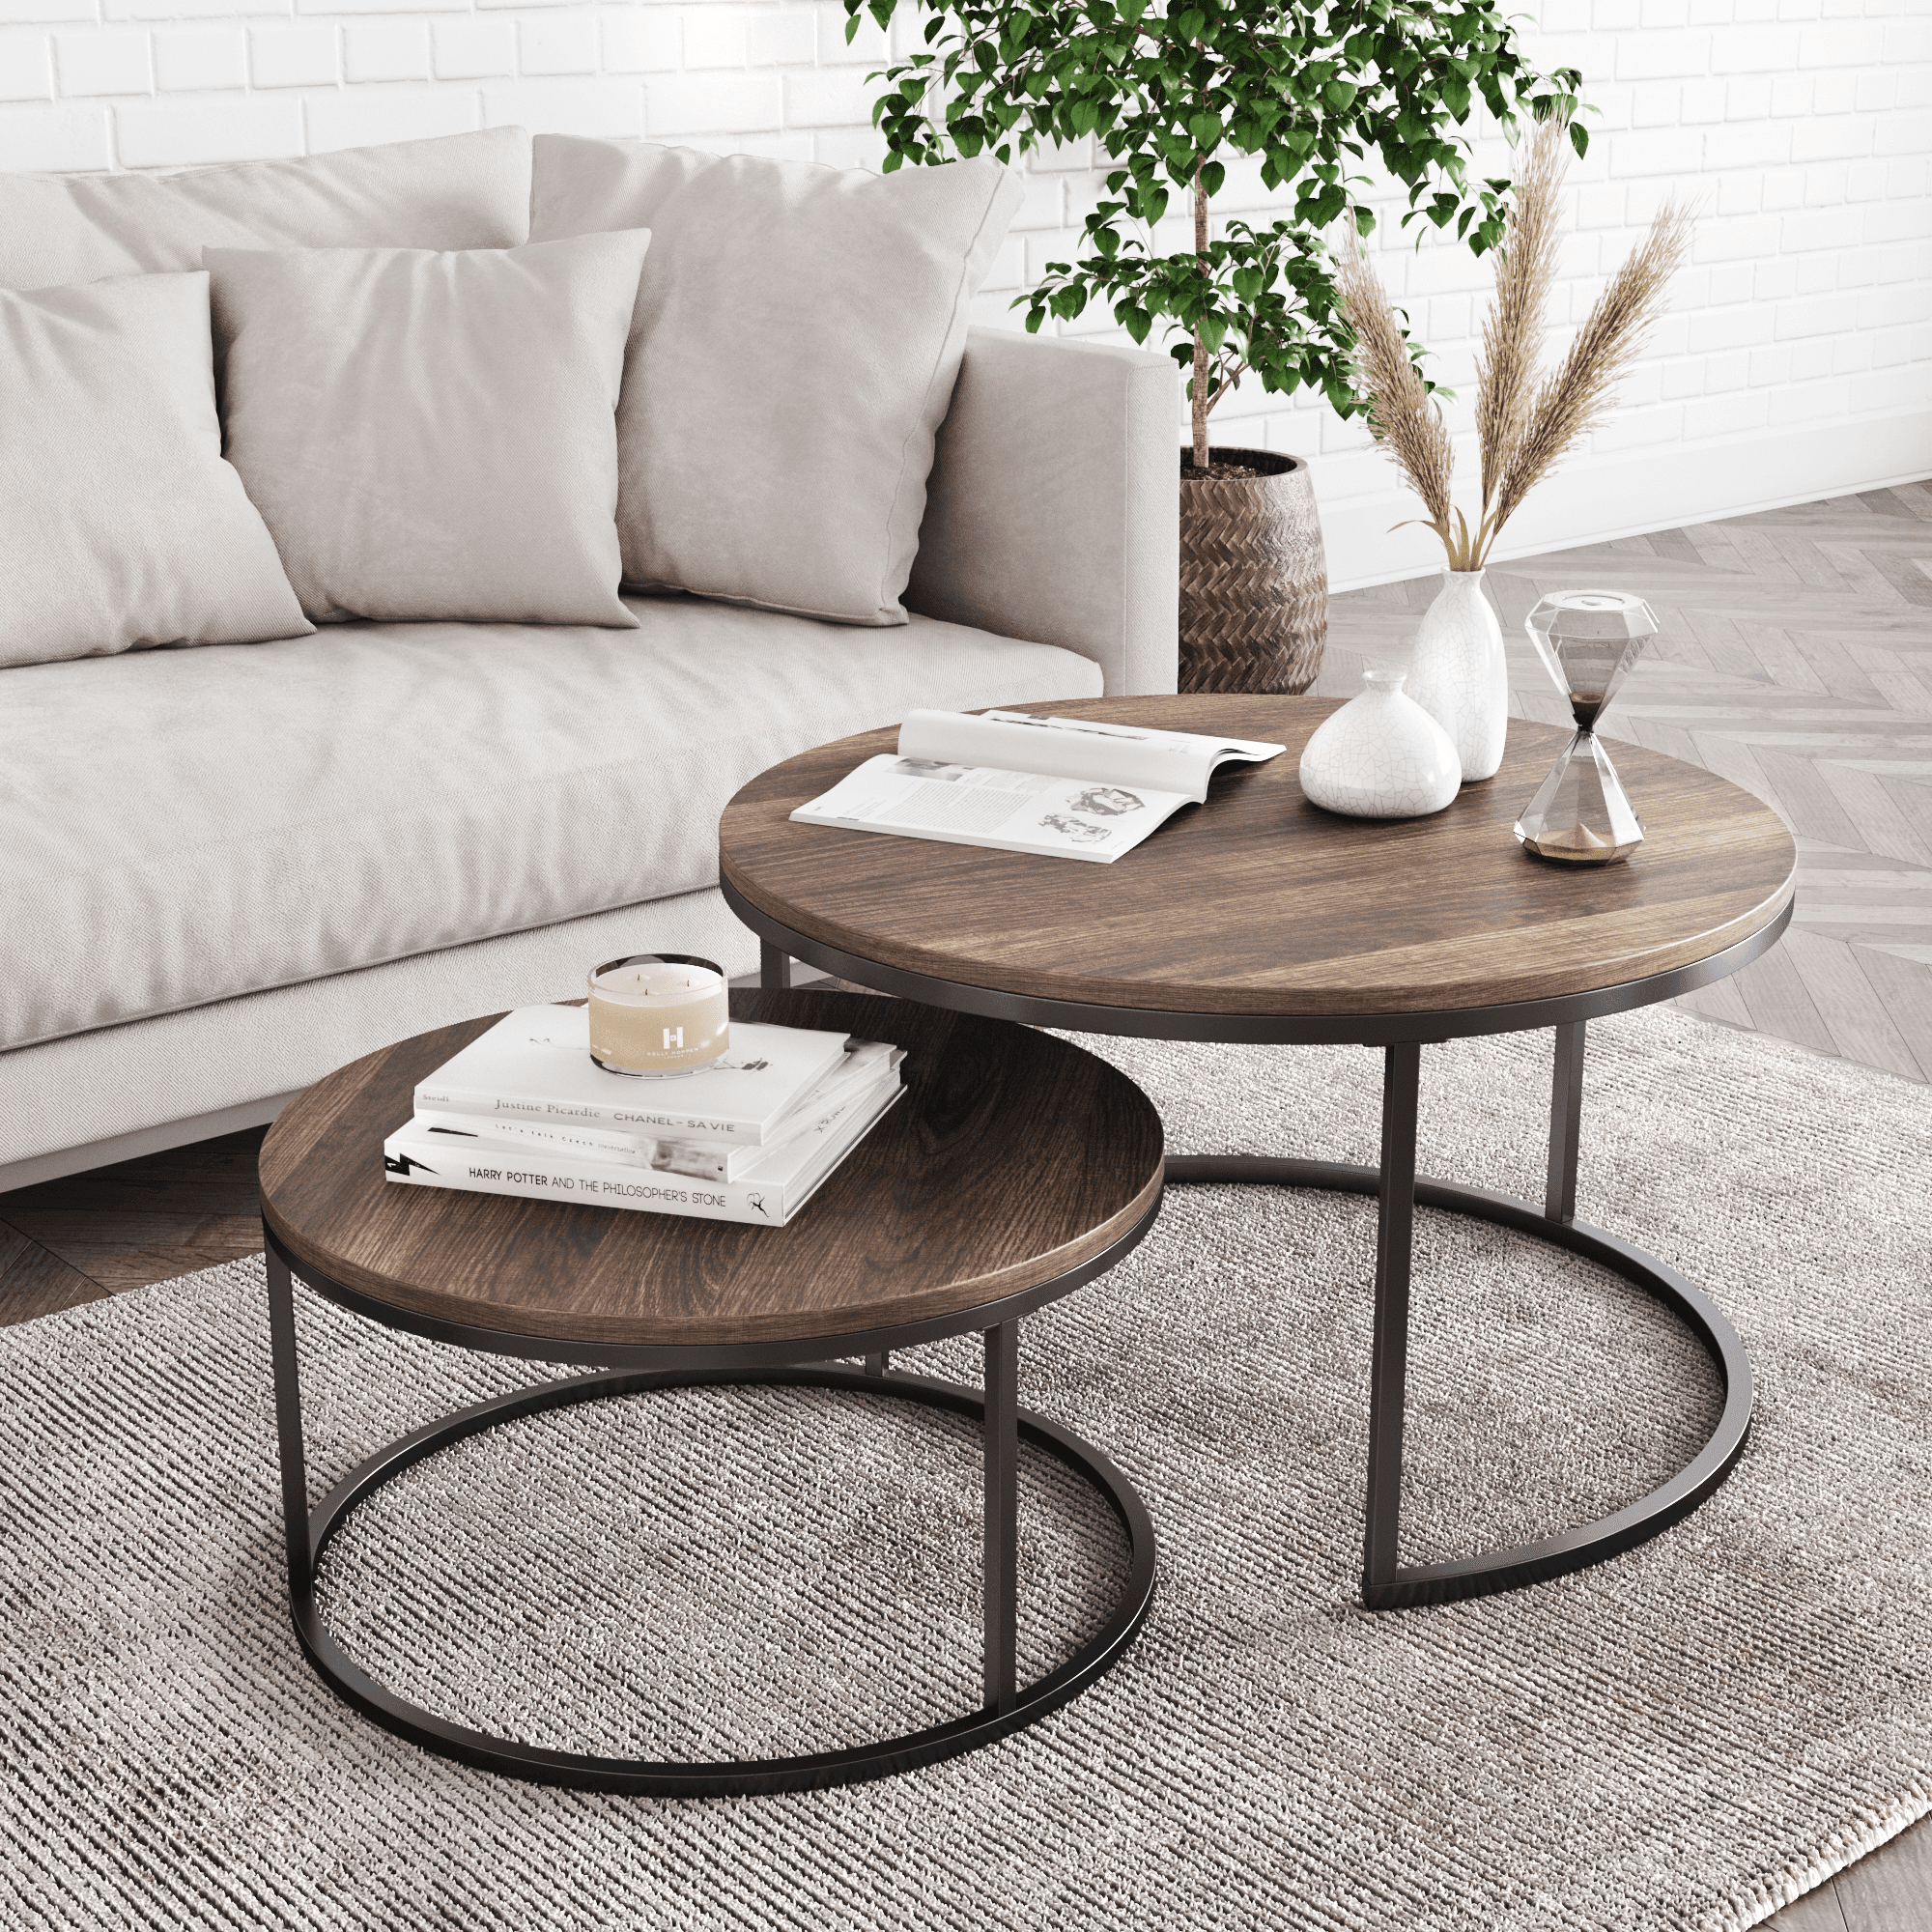 Stella Round Nesting Or Stacking Coffee Table Set Of 2 Wood Finish Inside Nesting Coffee Tables (Gallery 1 of 20)